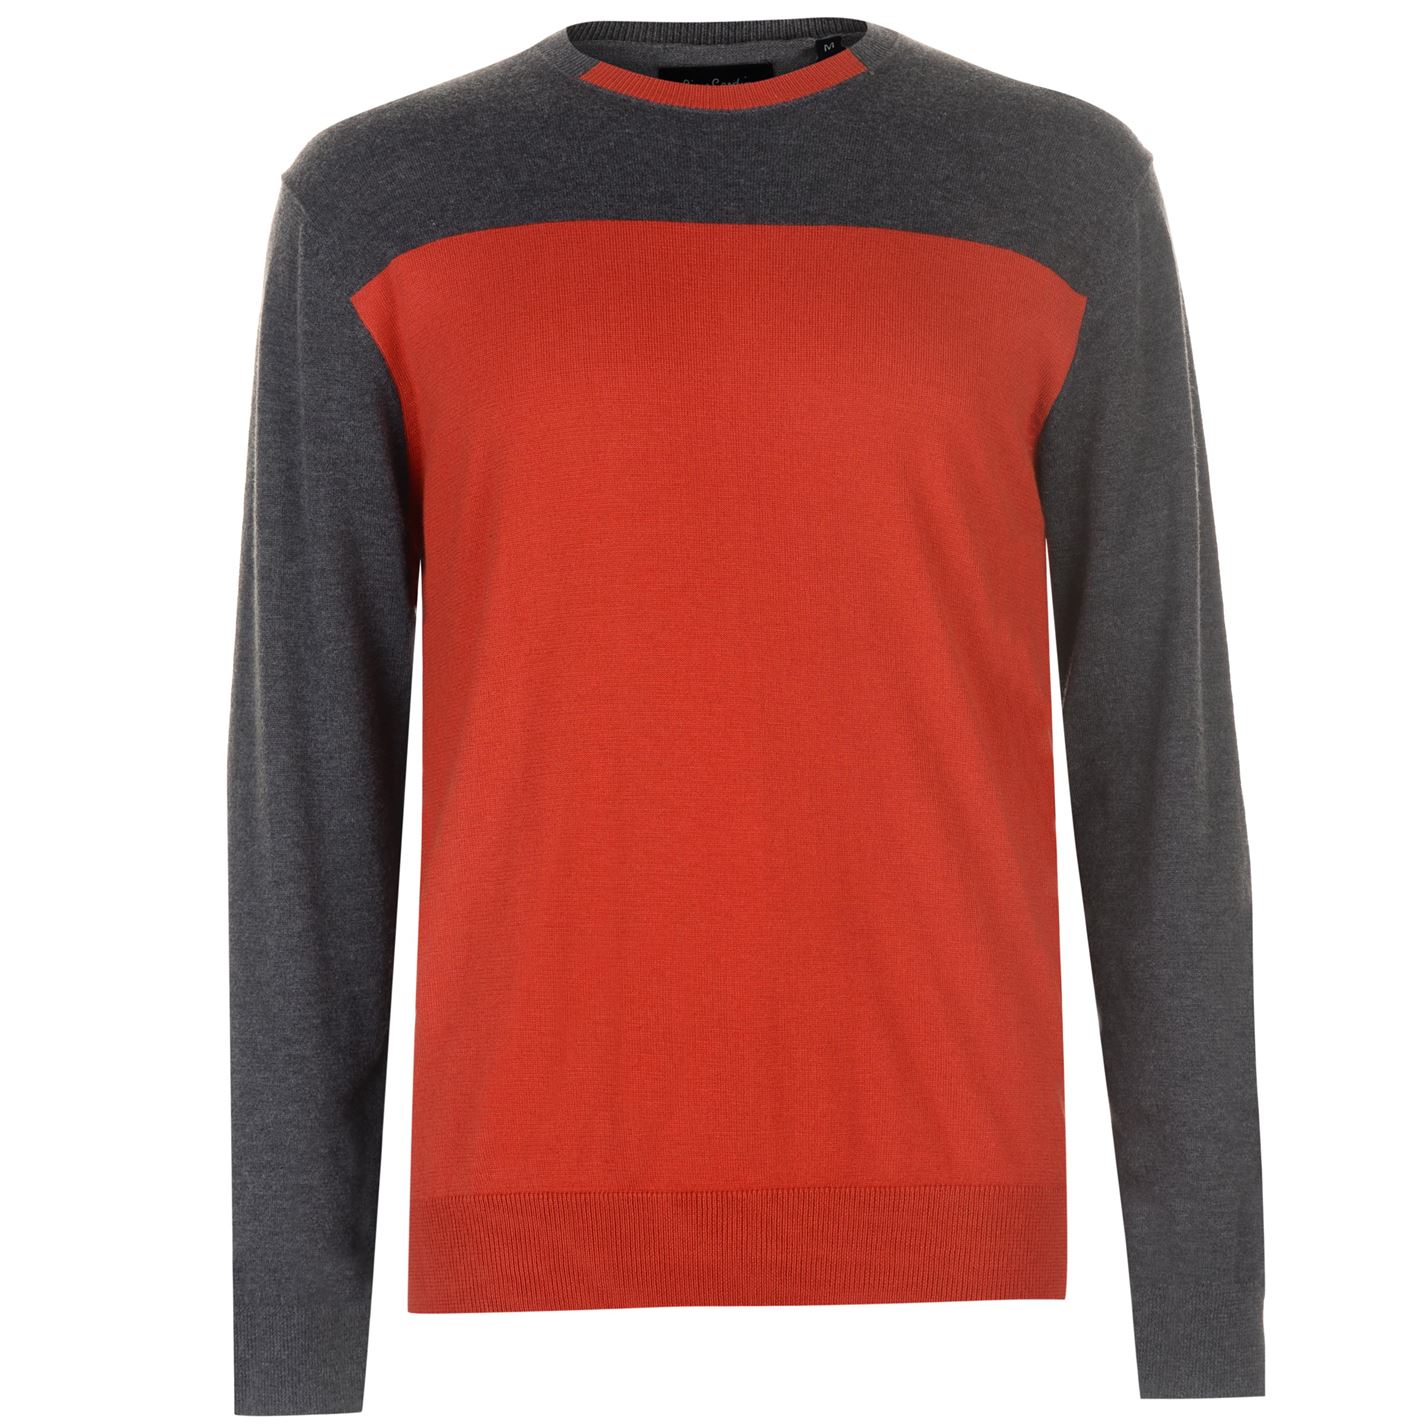 Two Tone Knitted Jumper Mens Jumpers